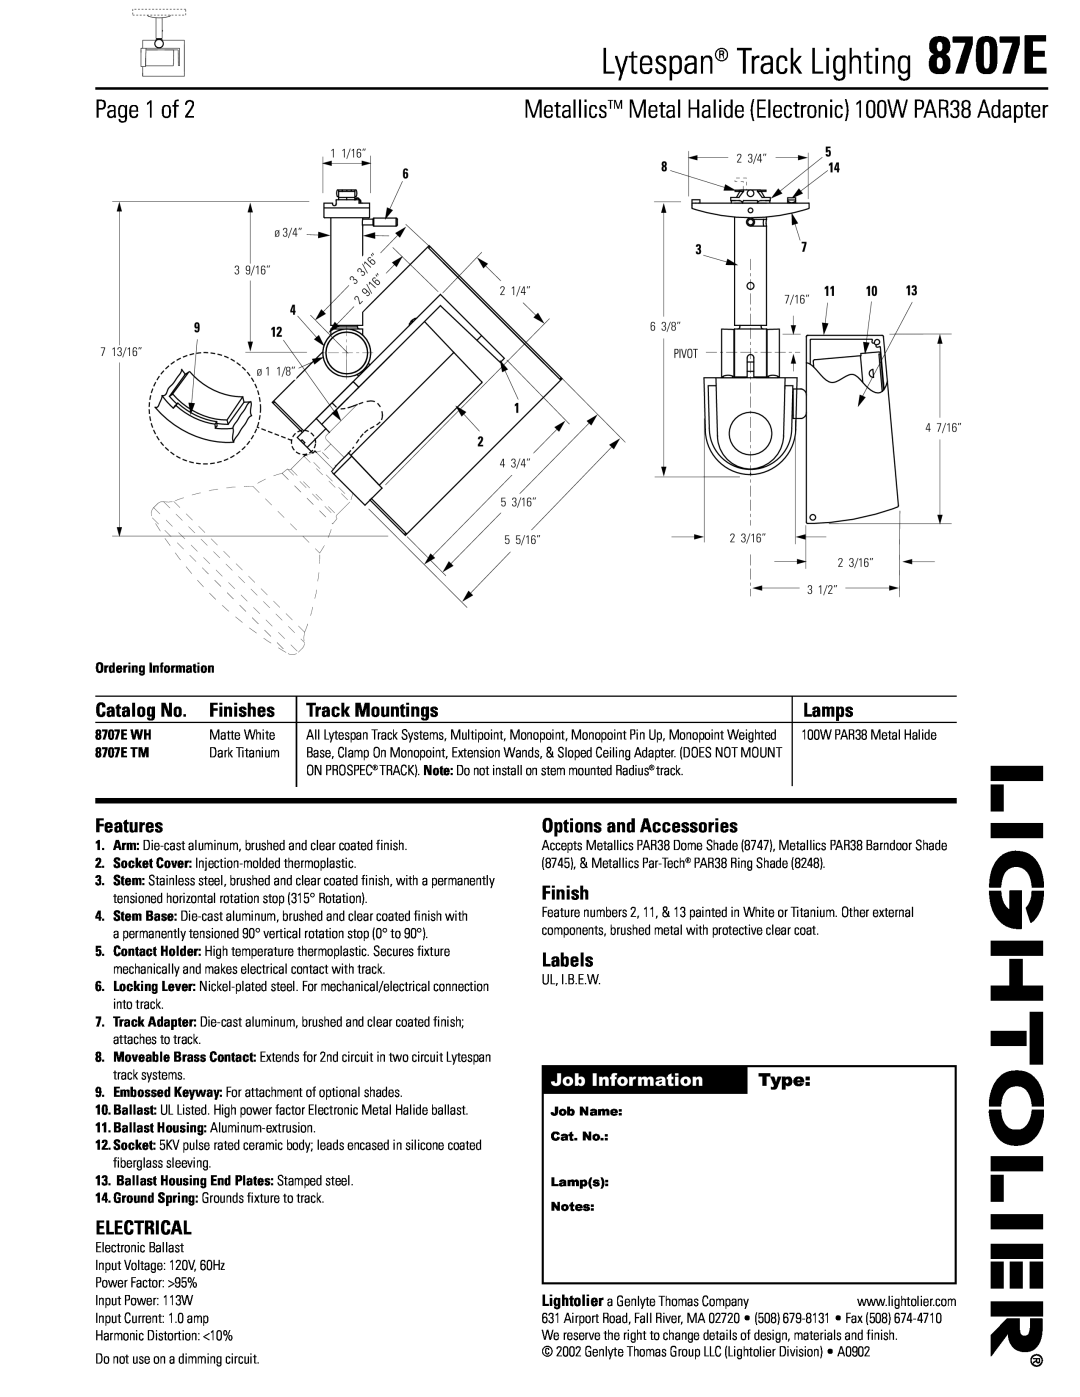 Lightolier 8707E manual Catalog No, Finishes, Track Mountings, Lamps, Features, Electrical, Options and Accessories, Type 